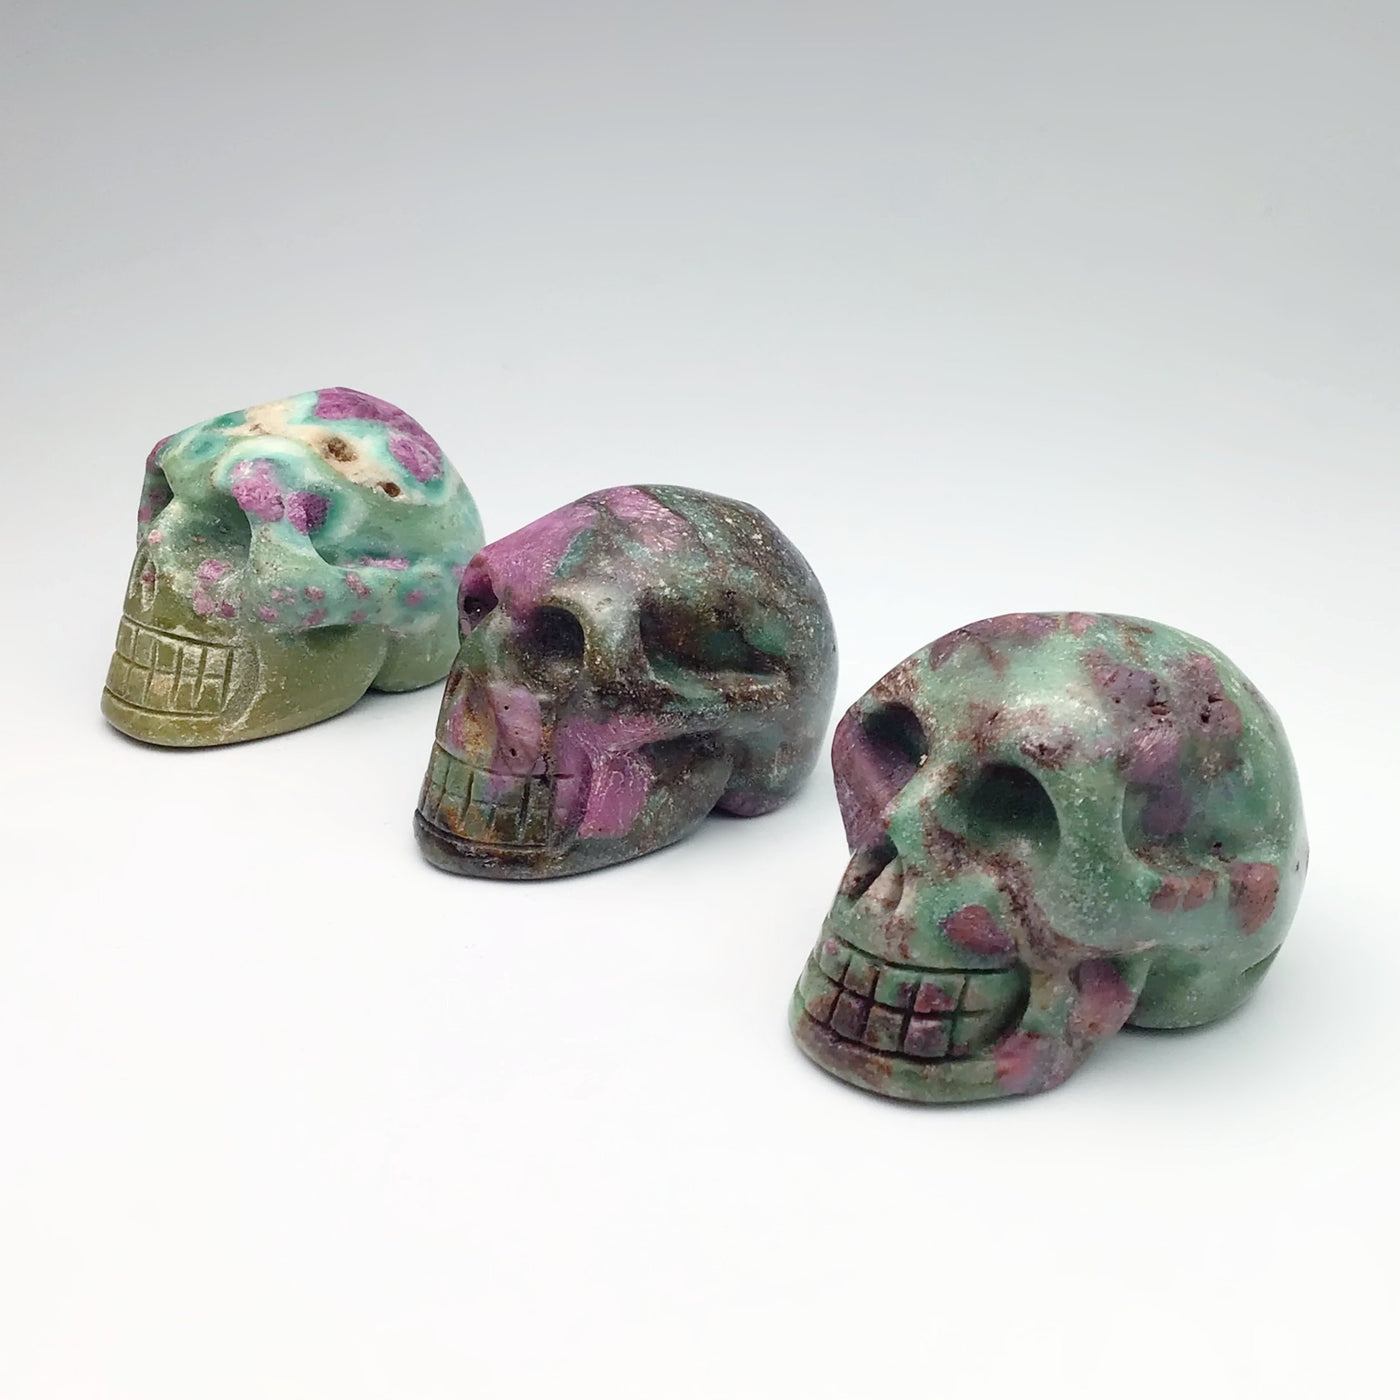 Carved Ruby Fuchsite Skull at $75 Each